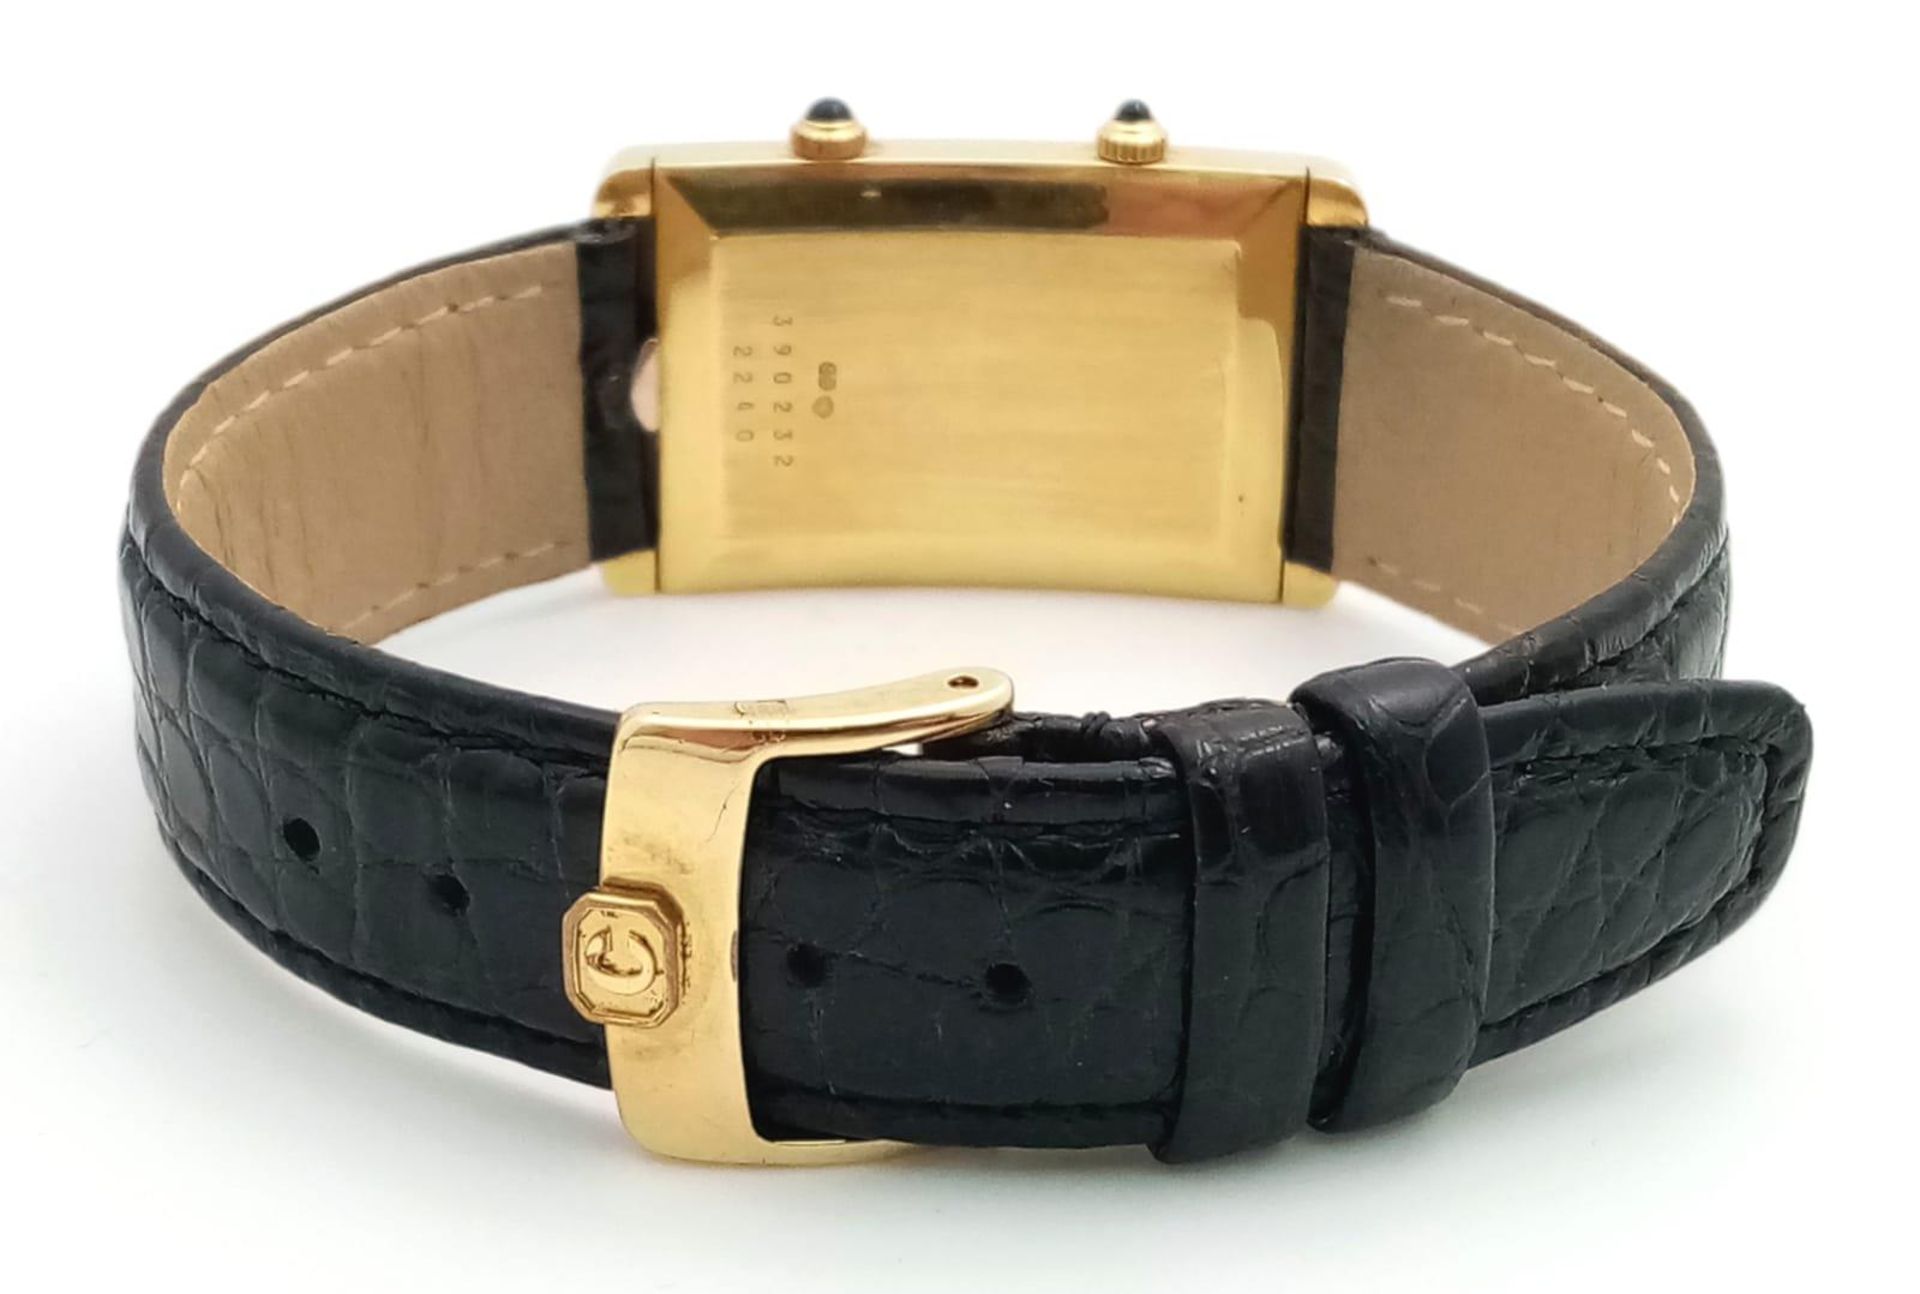 A Chopard 18K Gold Home Time (Dual Time) Gents Watch. Black leather strap. 18K gold rectangular case - Image 9 of 15